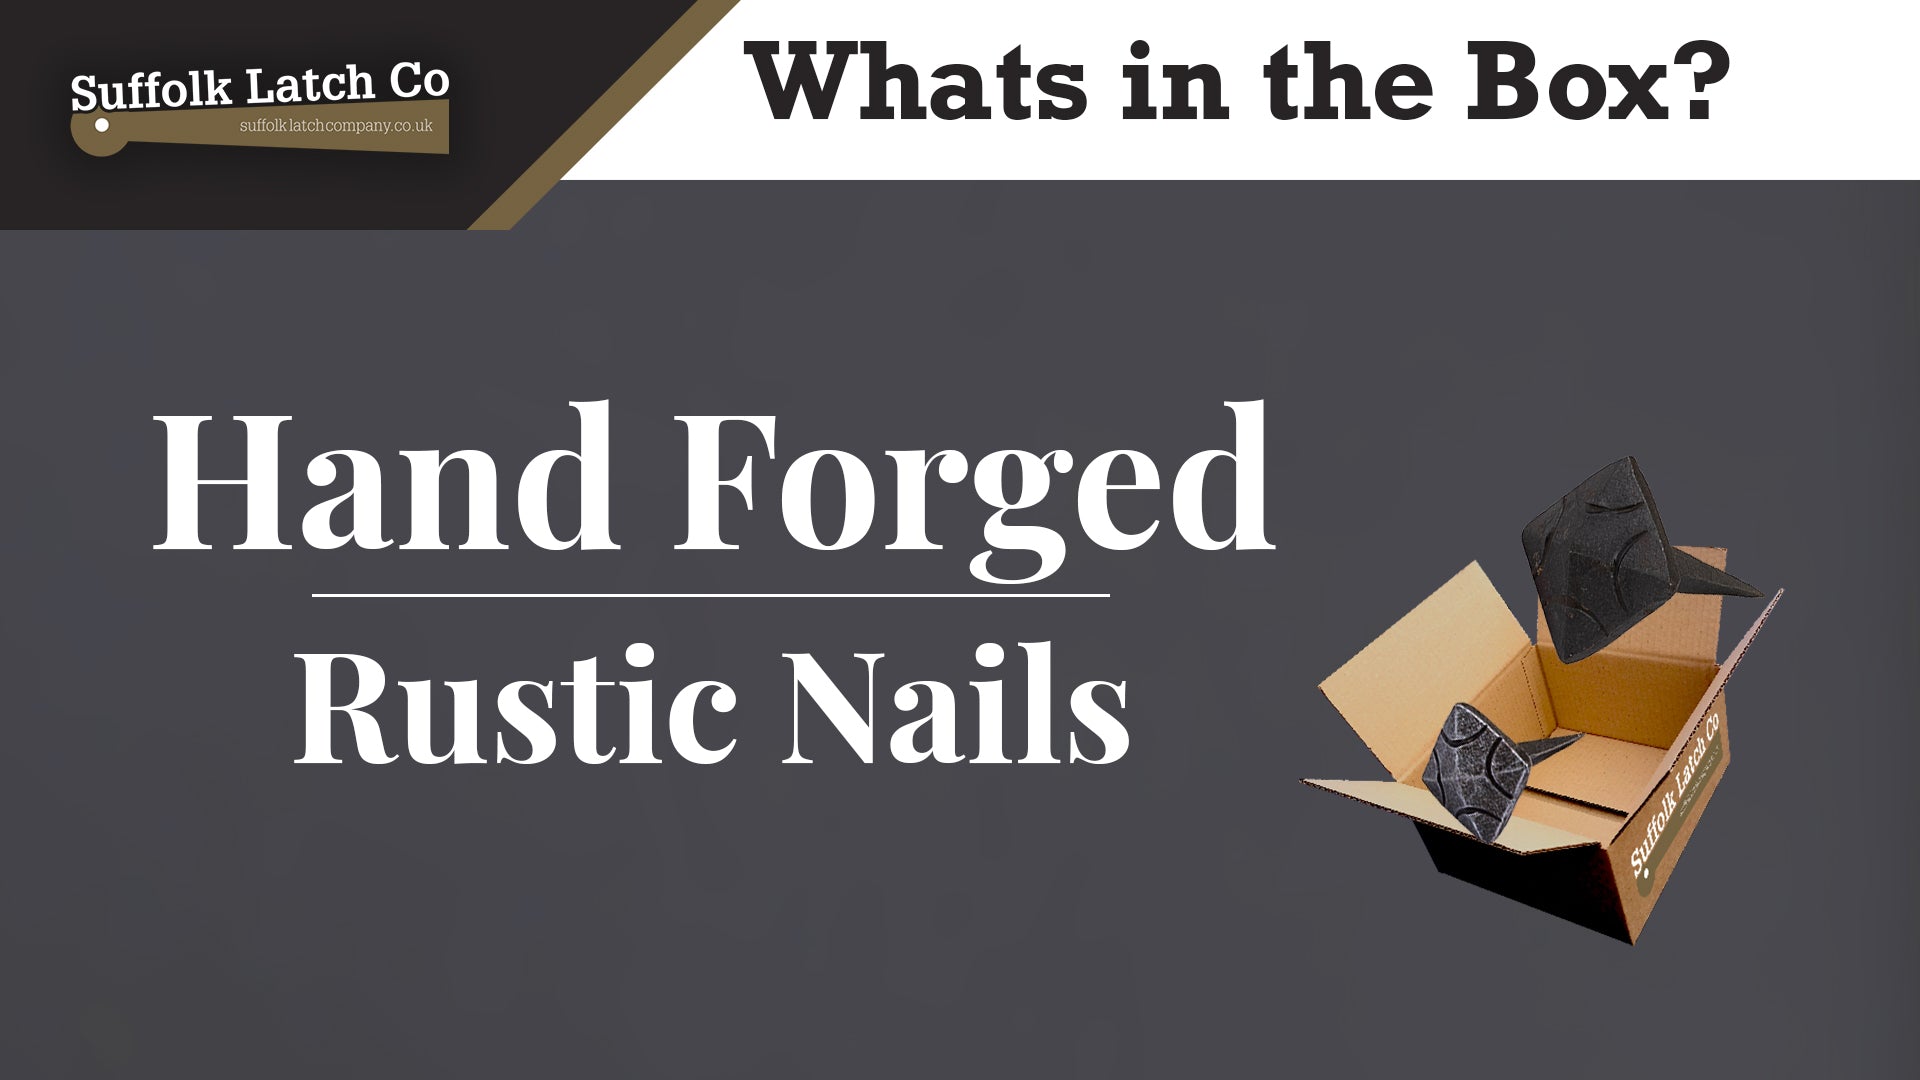 What's in the Box: Hand Forged Nail Rustic